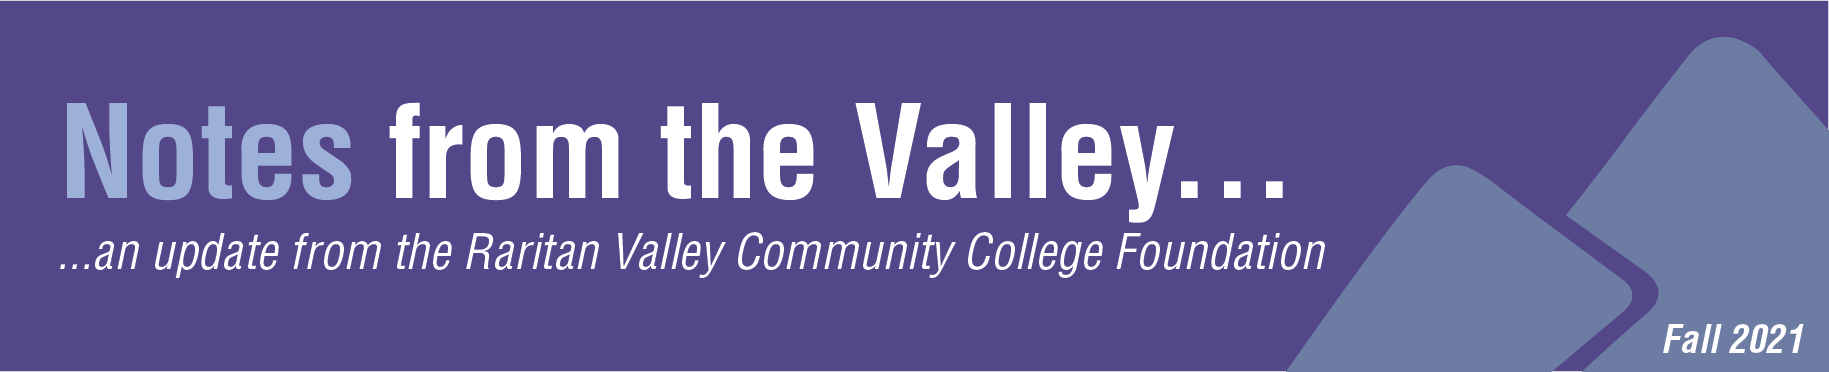 Fall 2021 Notes from the Valley